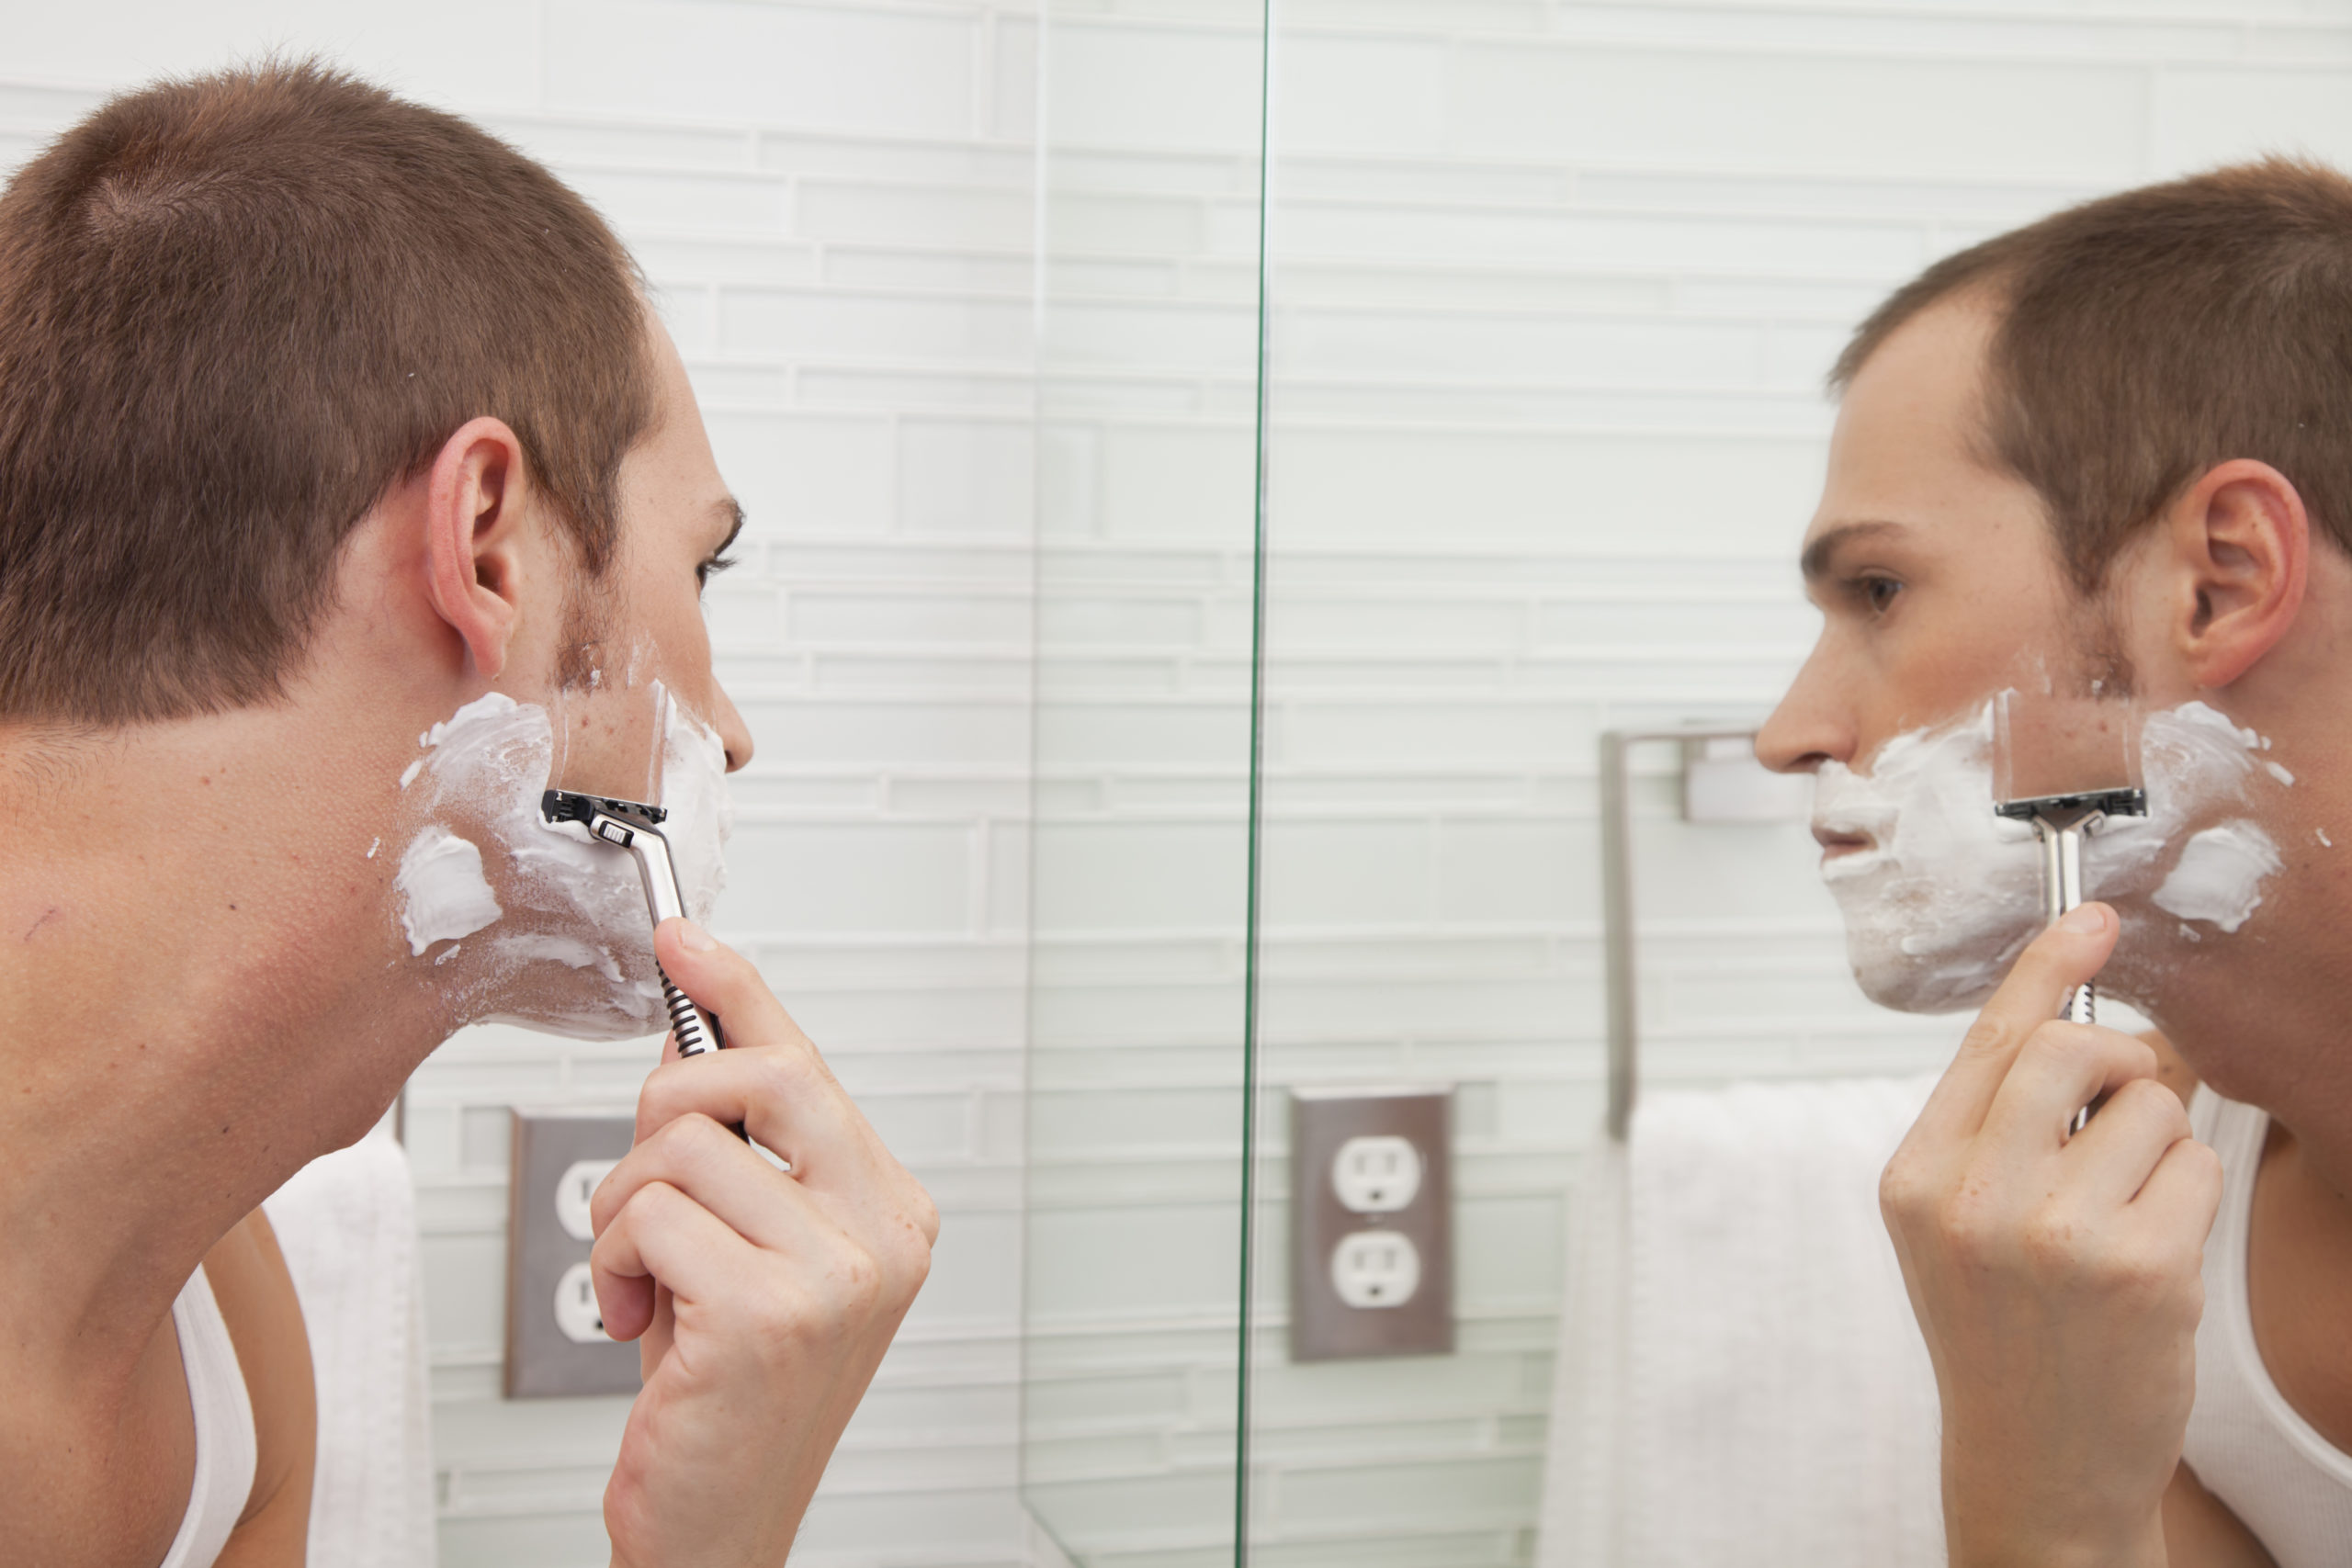 No Beard Day - a day for men to shave off their beards. #NoBeardDay